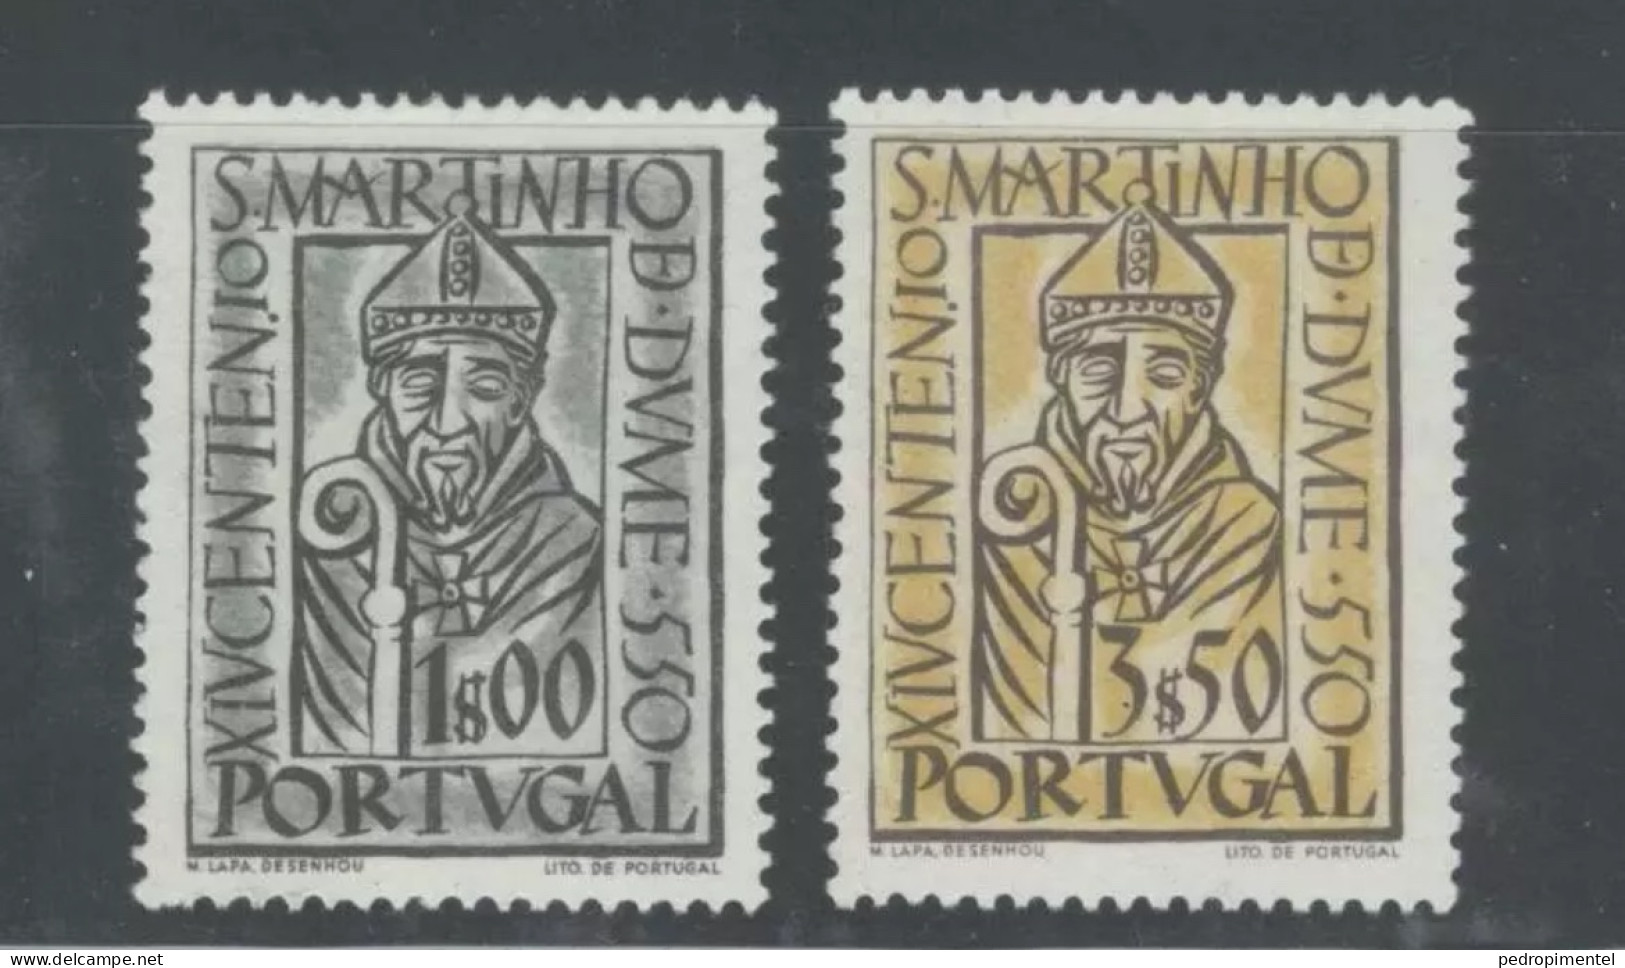 Portugal Stamps 1953 "Saint Martin" Condition MNH #778-779 - Unused Stamps